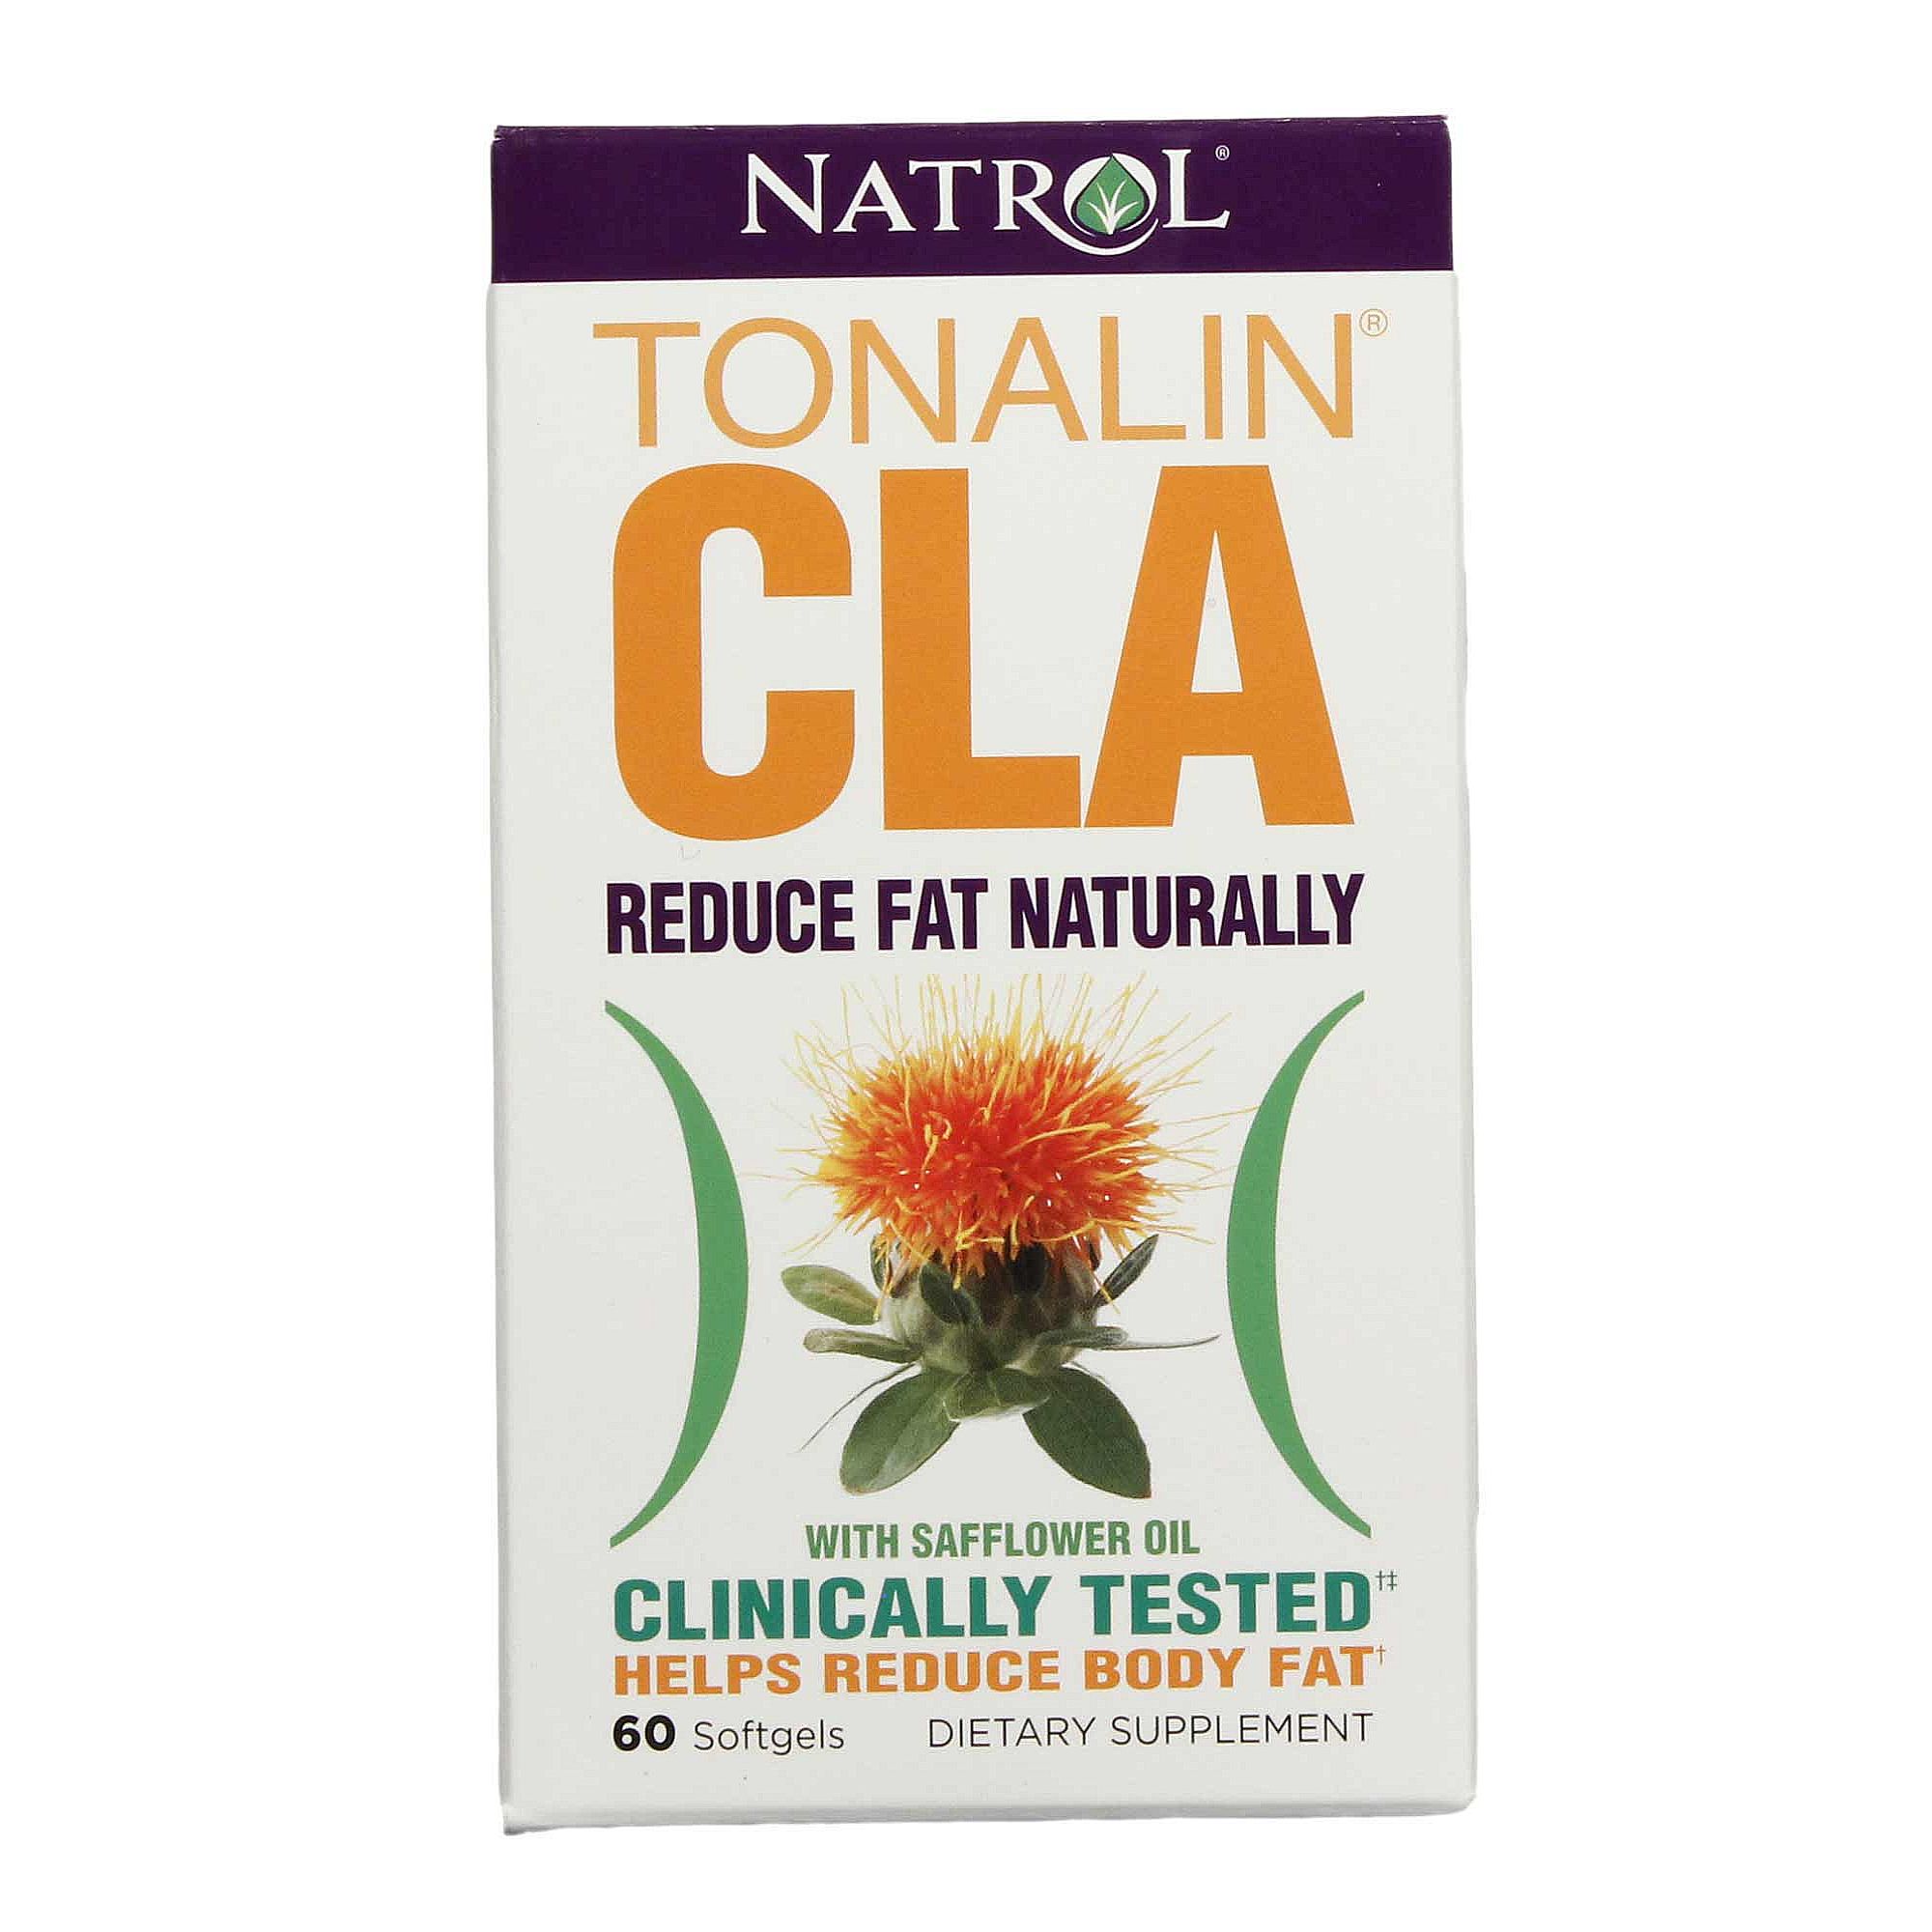 What are the side effects of taking Tonalin CLA?